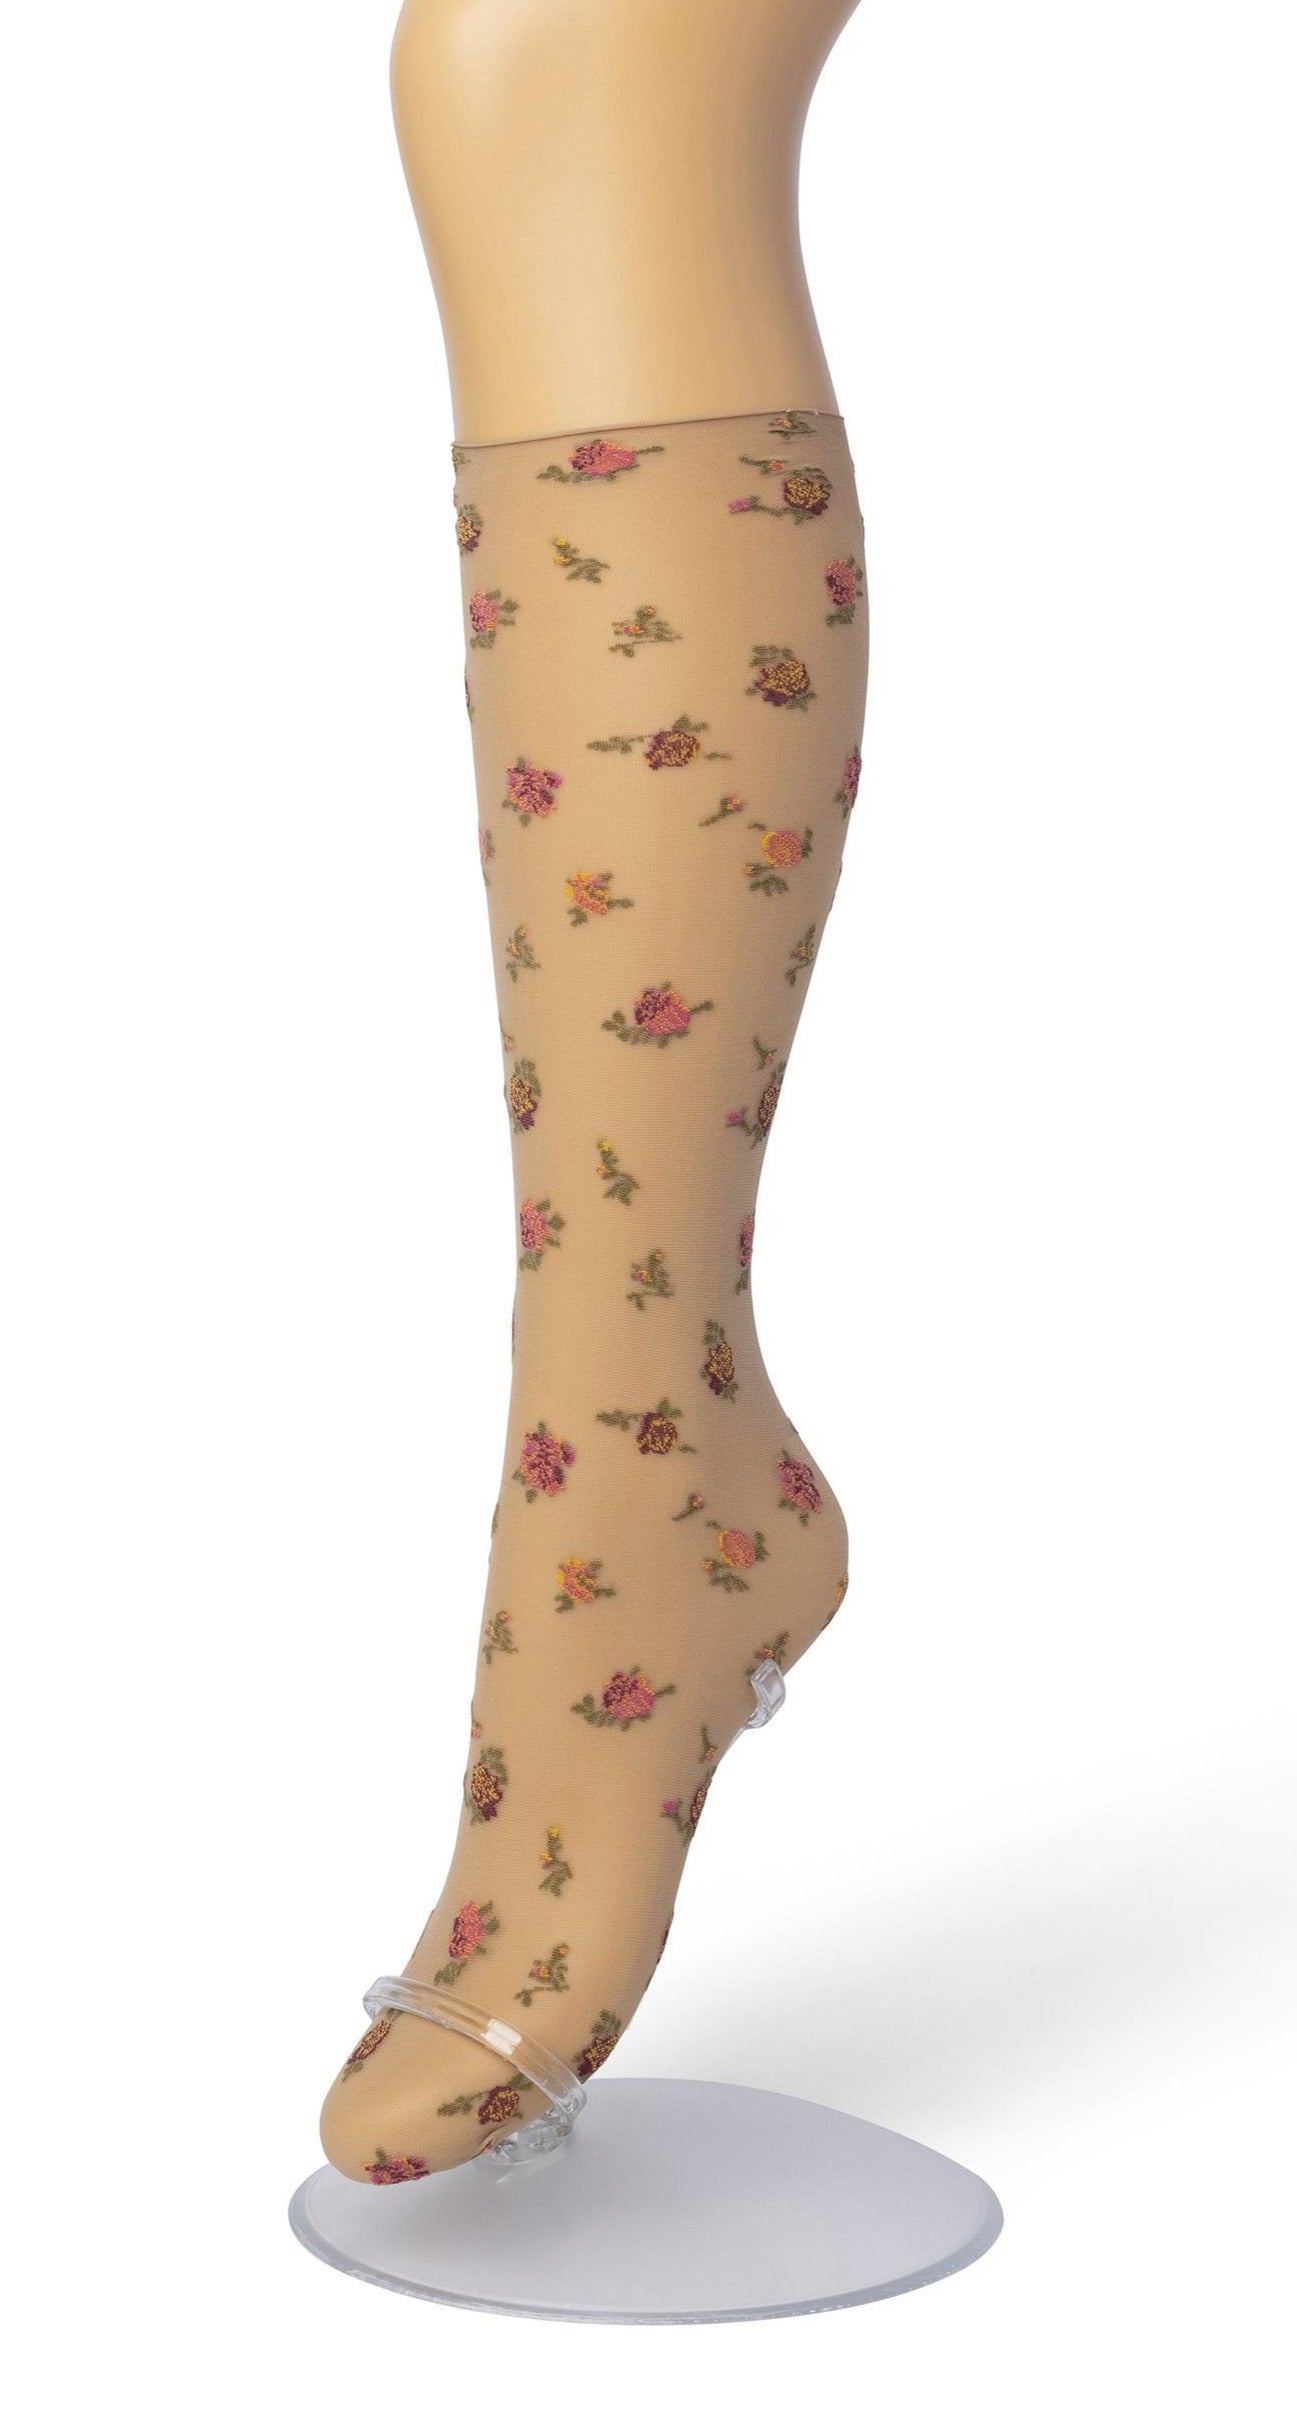 Bonnie Doon English Flower - Sheer nude fashion knee-high socks with a woven floral pattern and no cuff roll comfort edge.